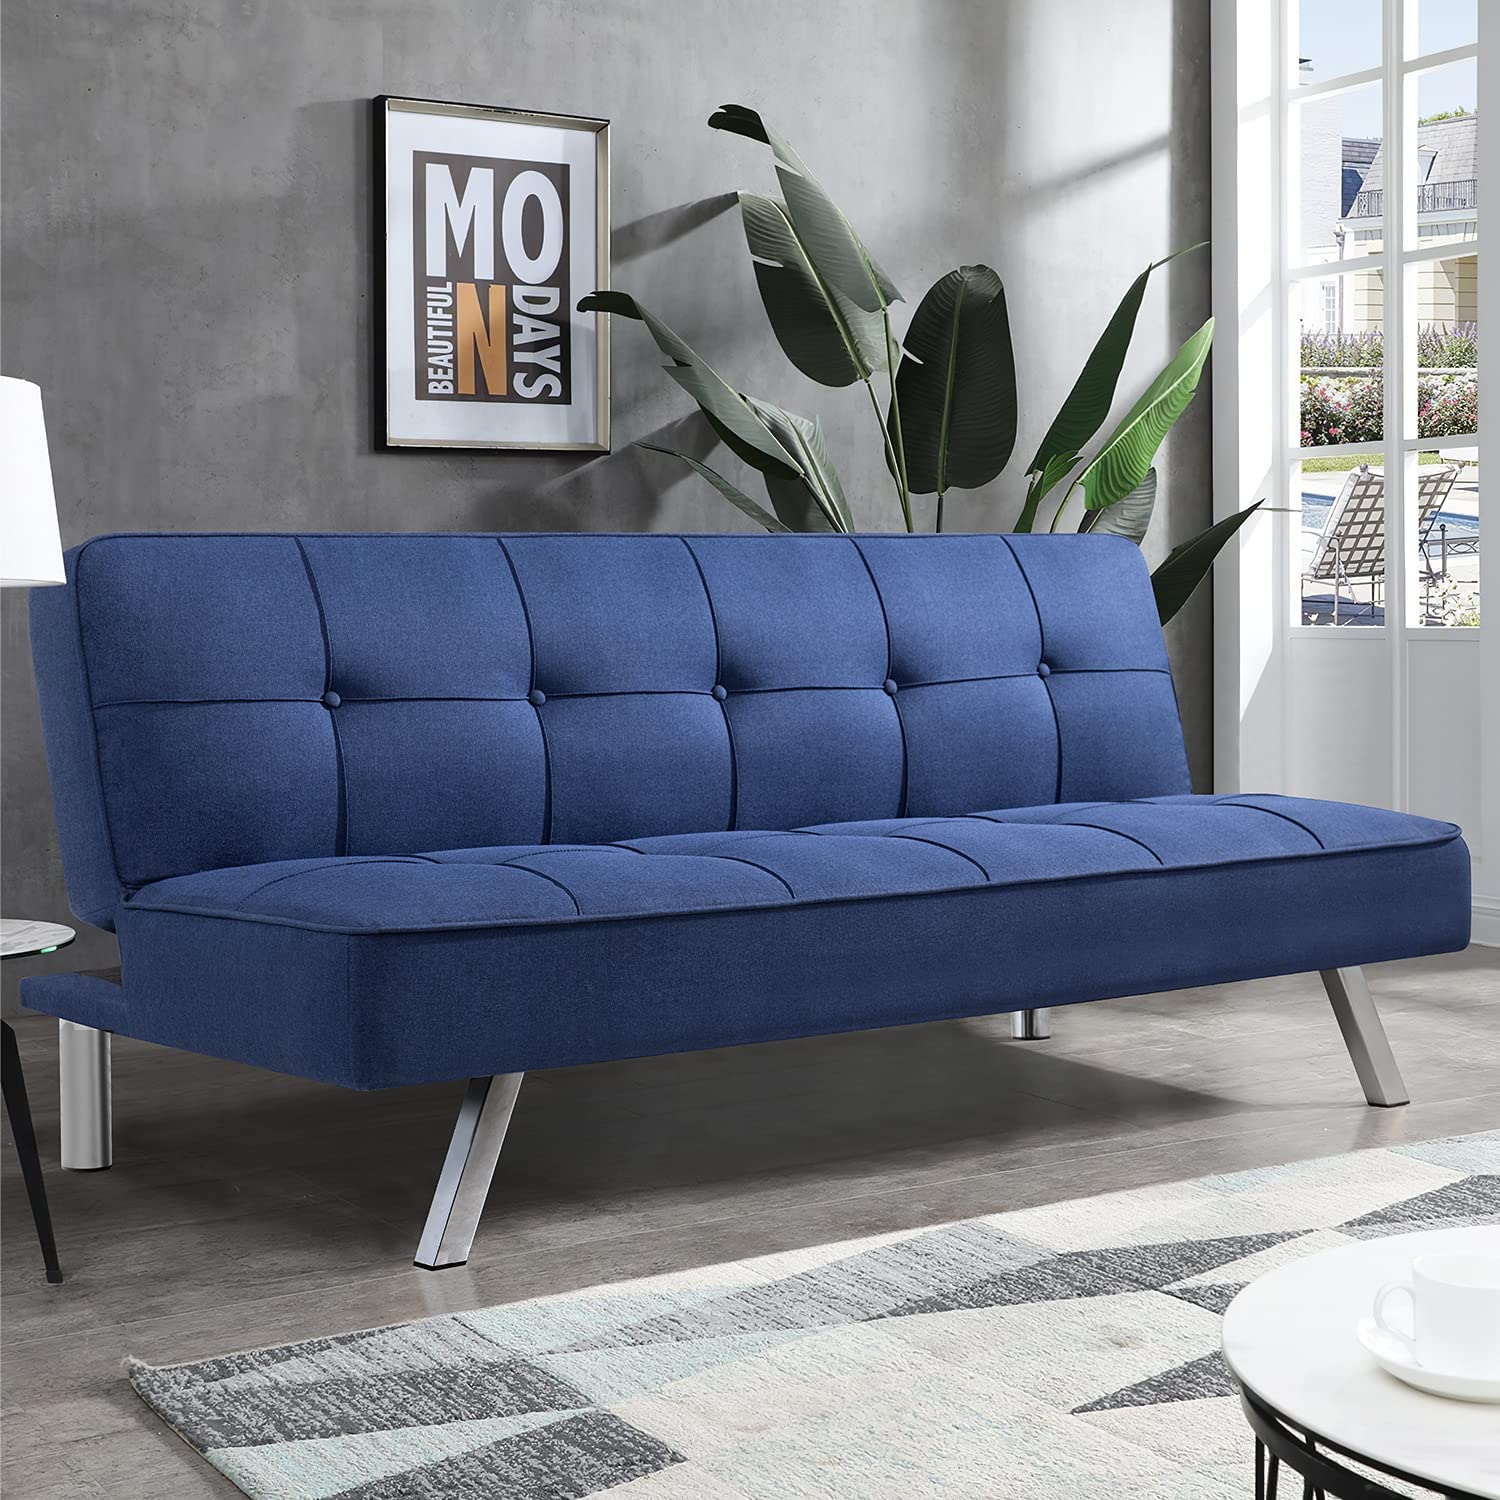 5 of the Best Sofa Beds you can Buy